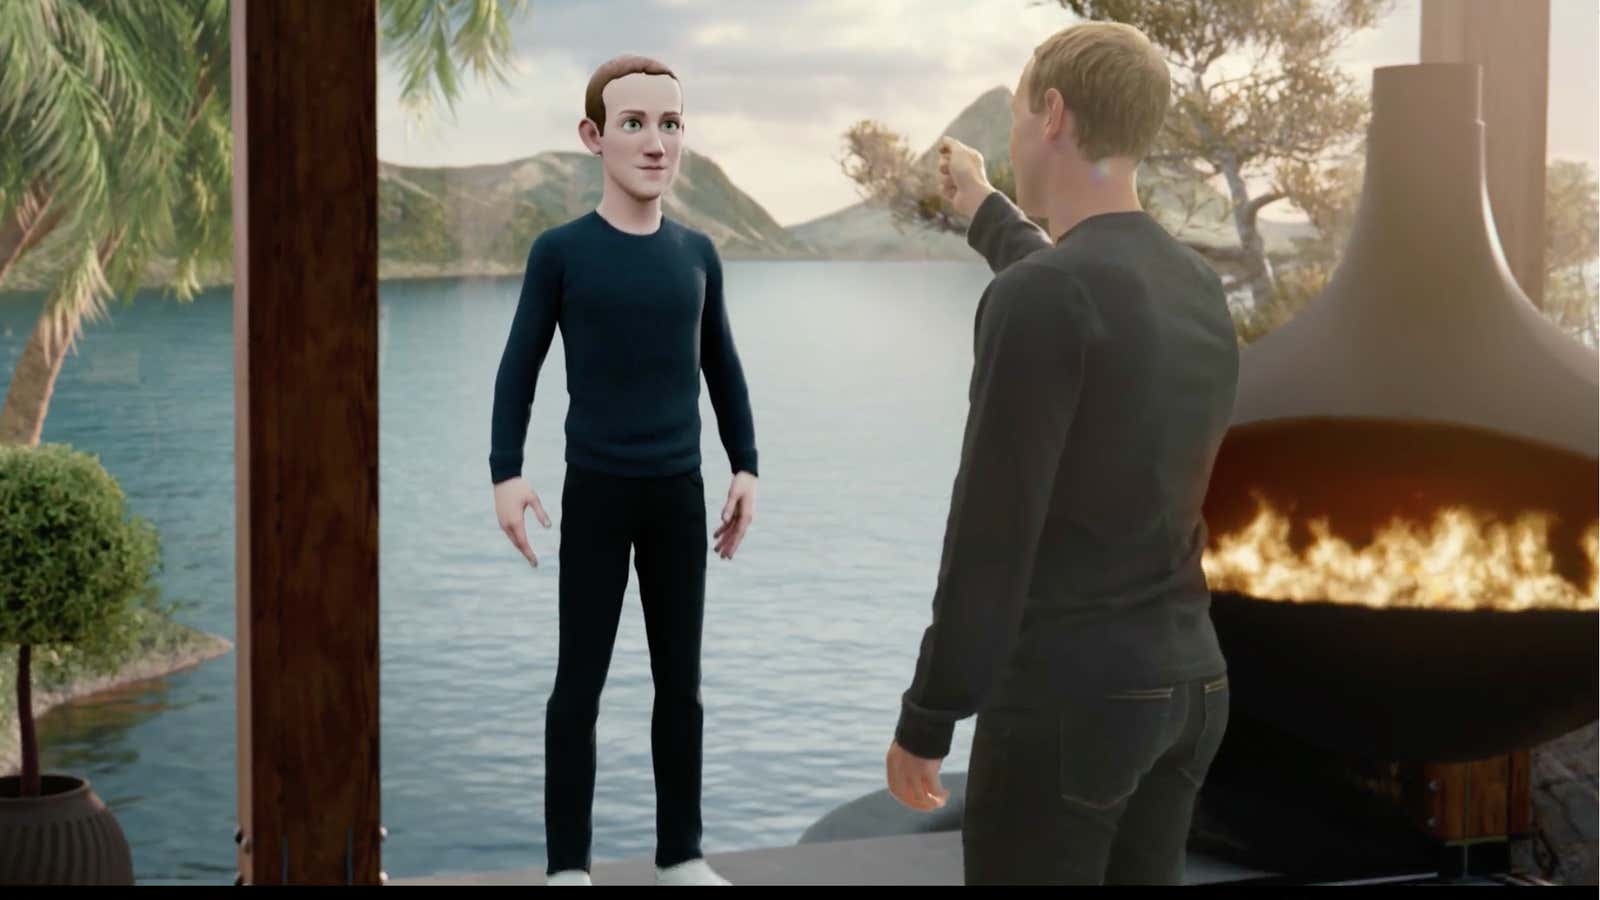 Mark Zuckerberg controls his avatar in a demonstration of the metaverse.